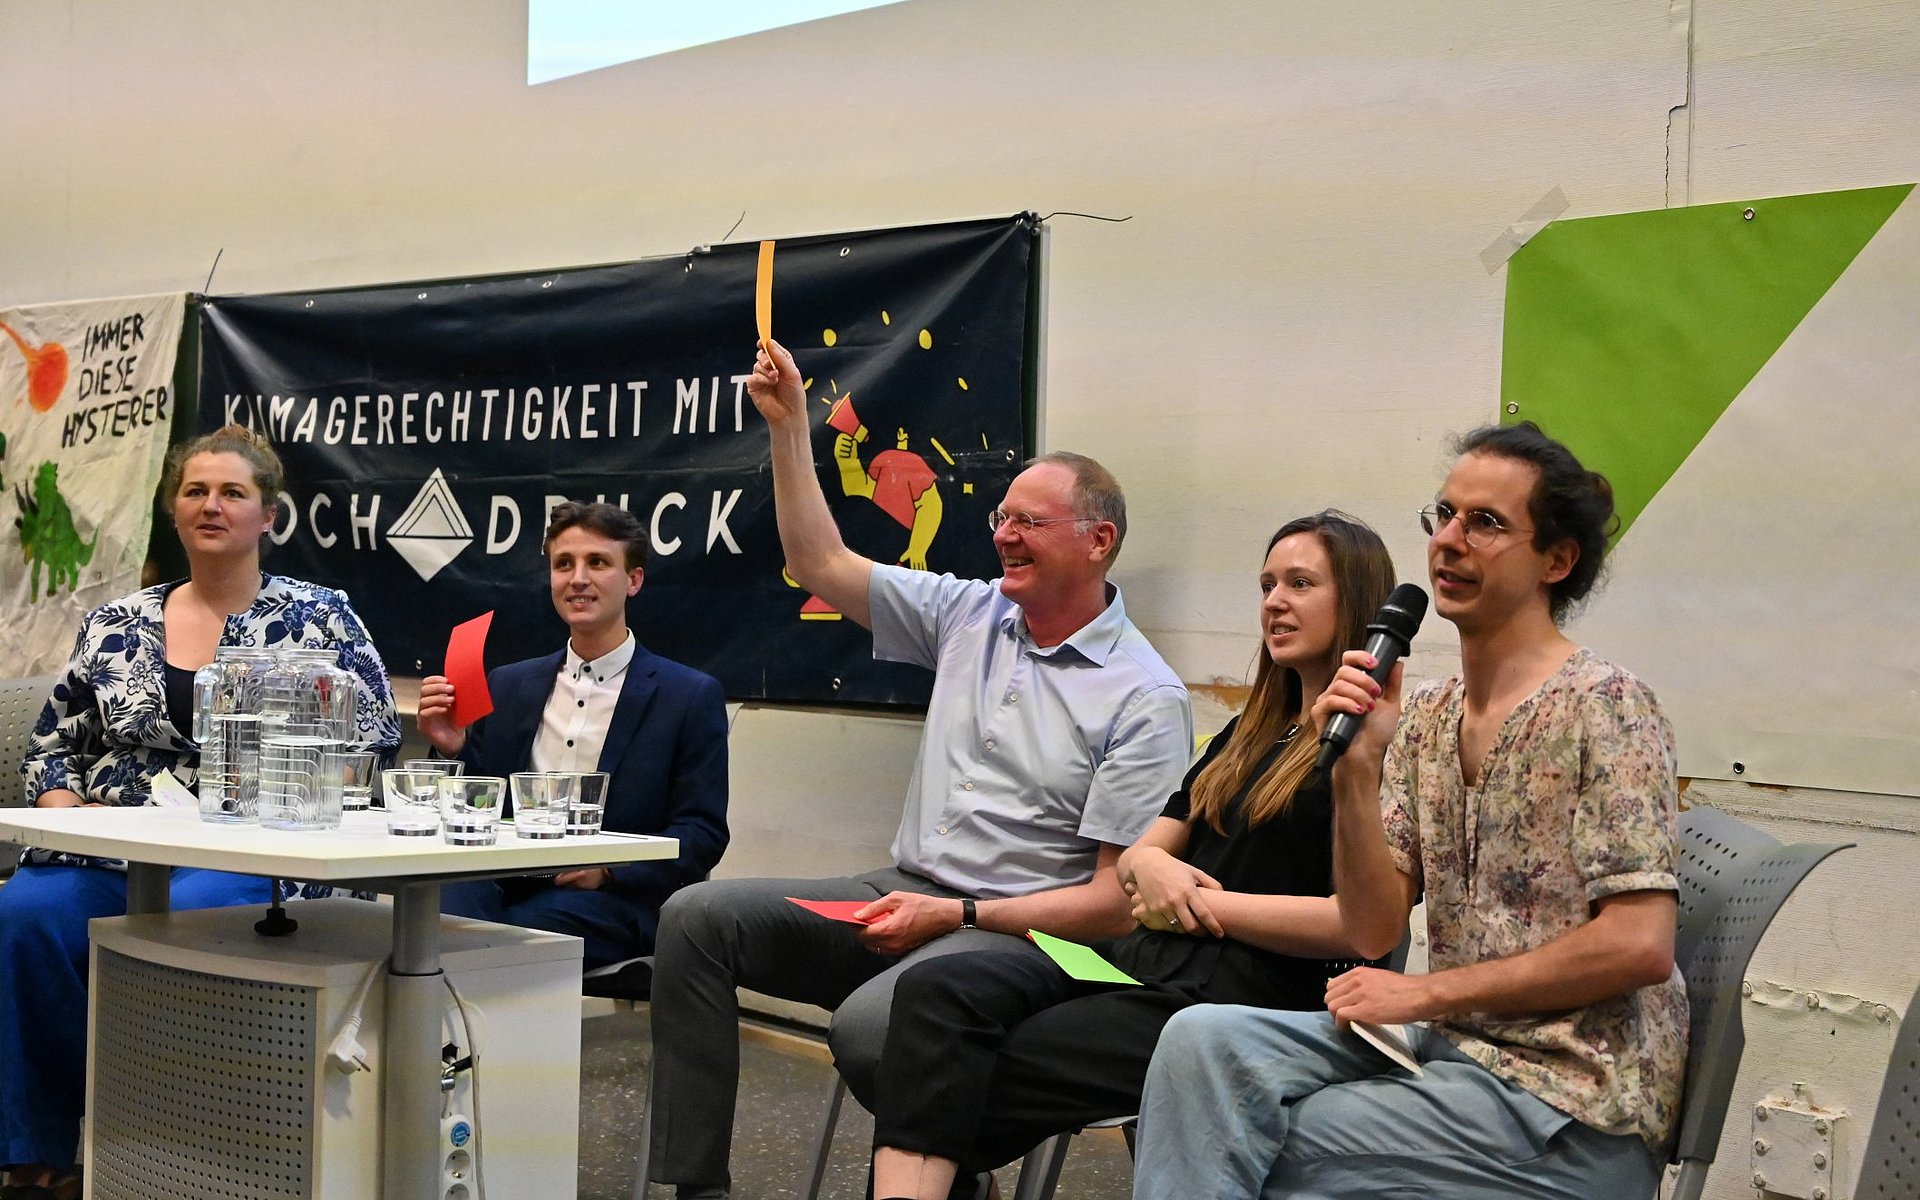 Elias Singer, Werner Lang, Lucia Layritz, and the moderation team at the fishbowl discussion on the role of universities in climate crisis.